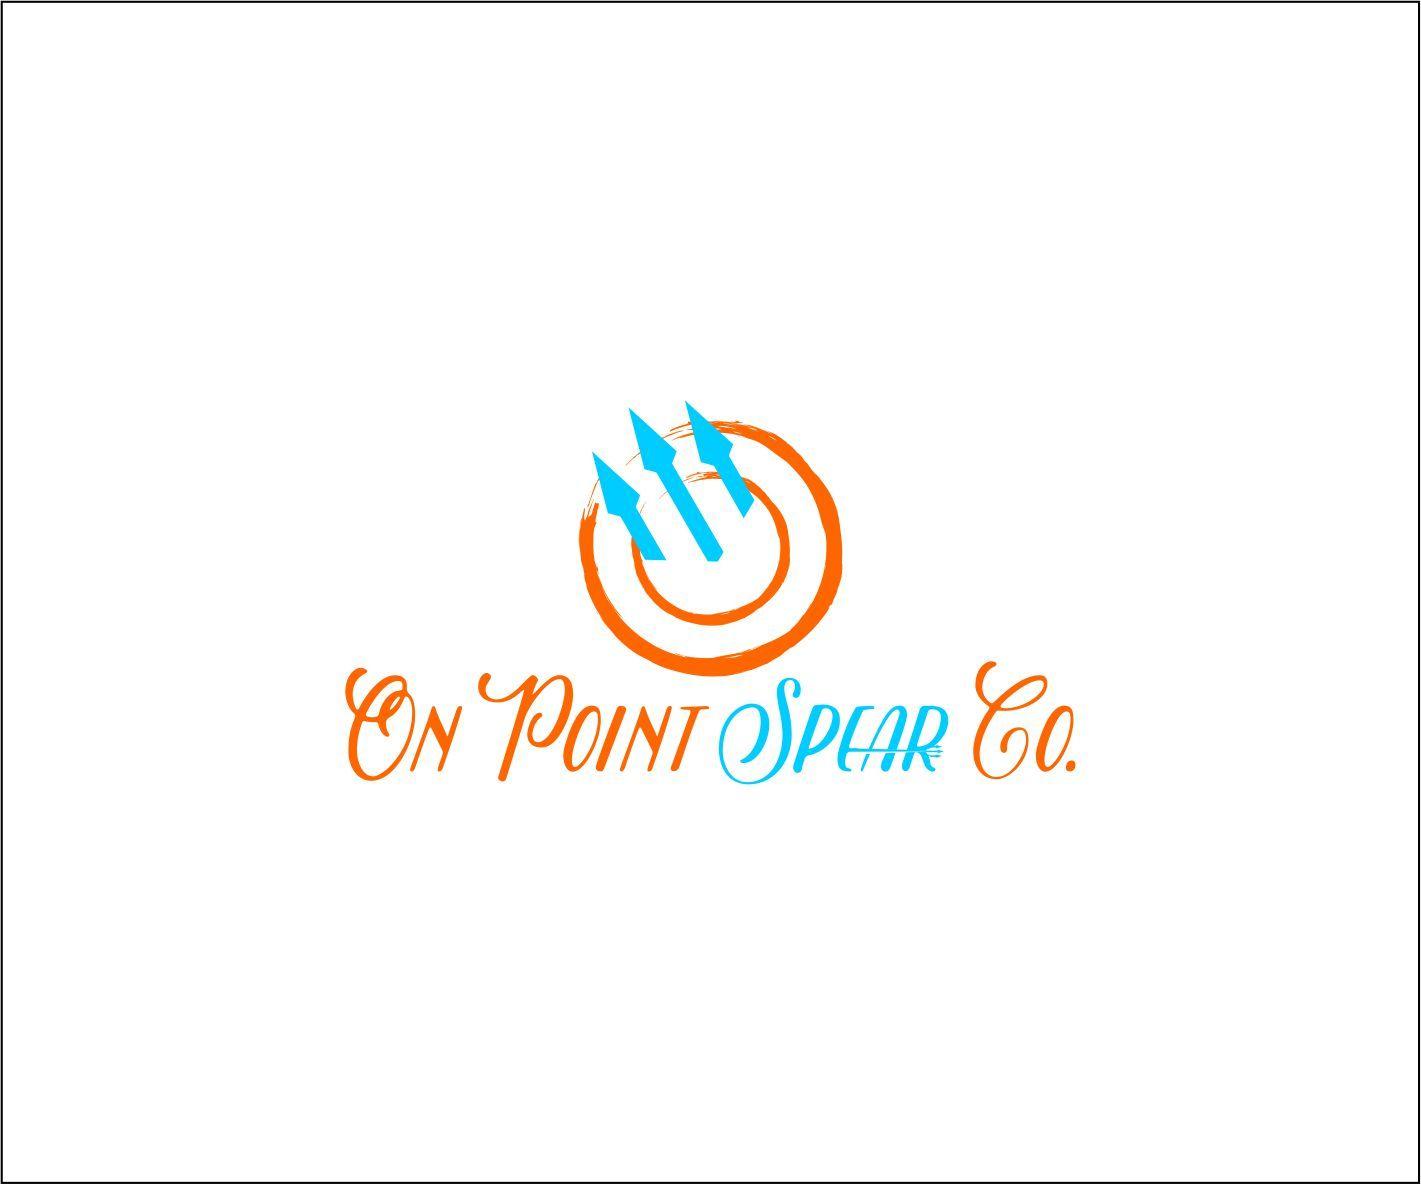 Orange and Blue Spear Logo - Bold, Playful, Retail Logo Design for On Point Spear Co. by Sam ...